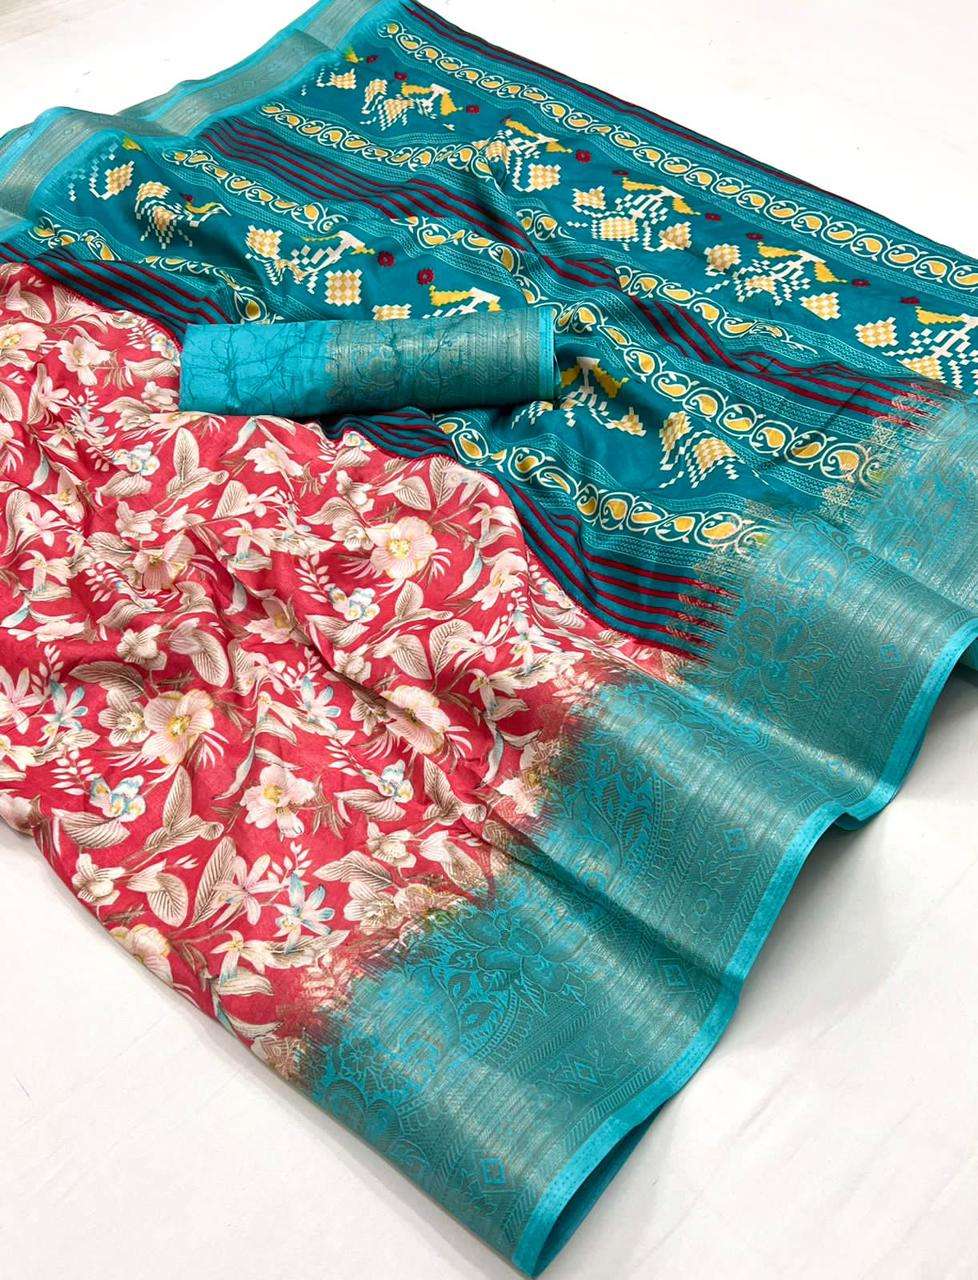 Festival Special Dola Silk with Flower Printed Jacquard Bord...